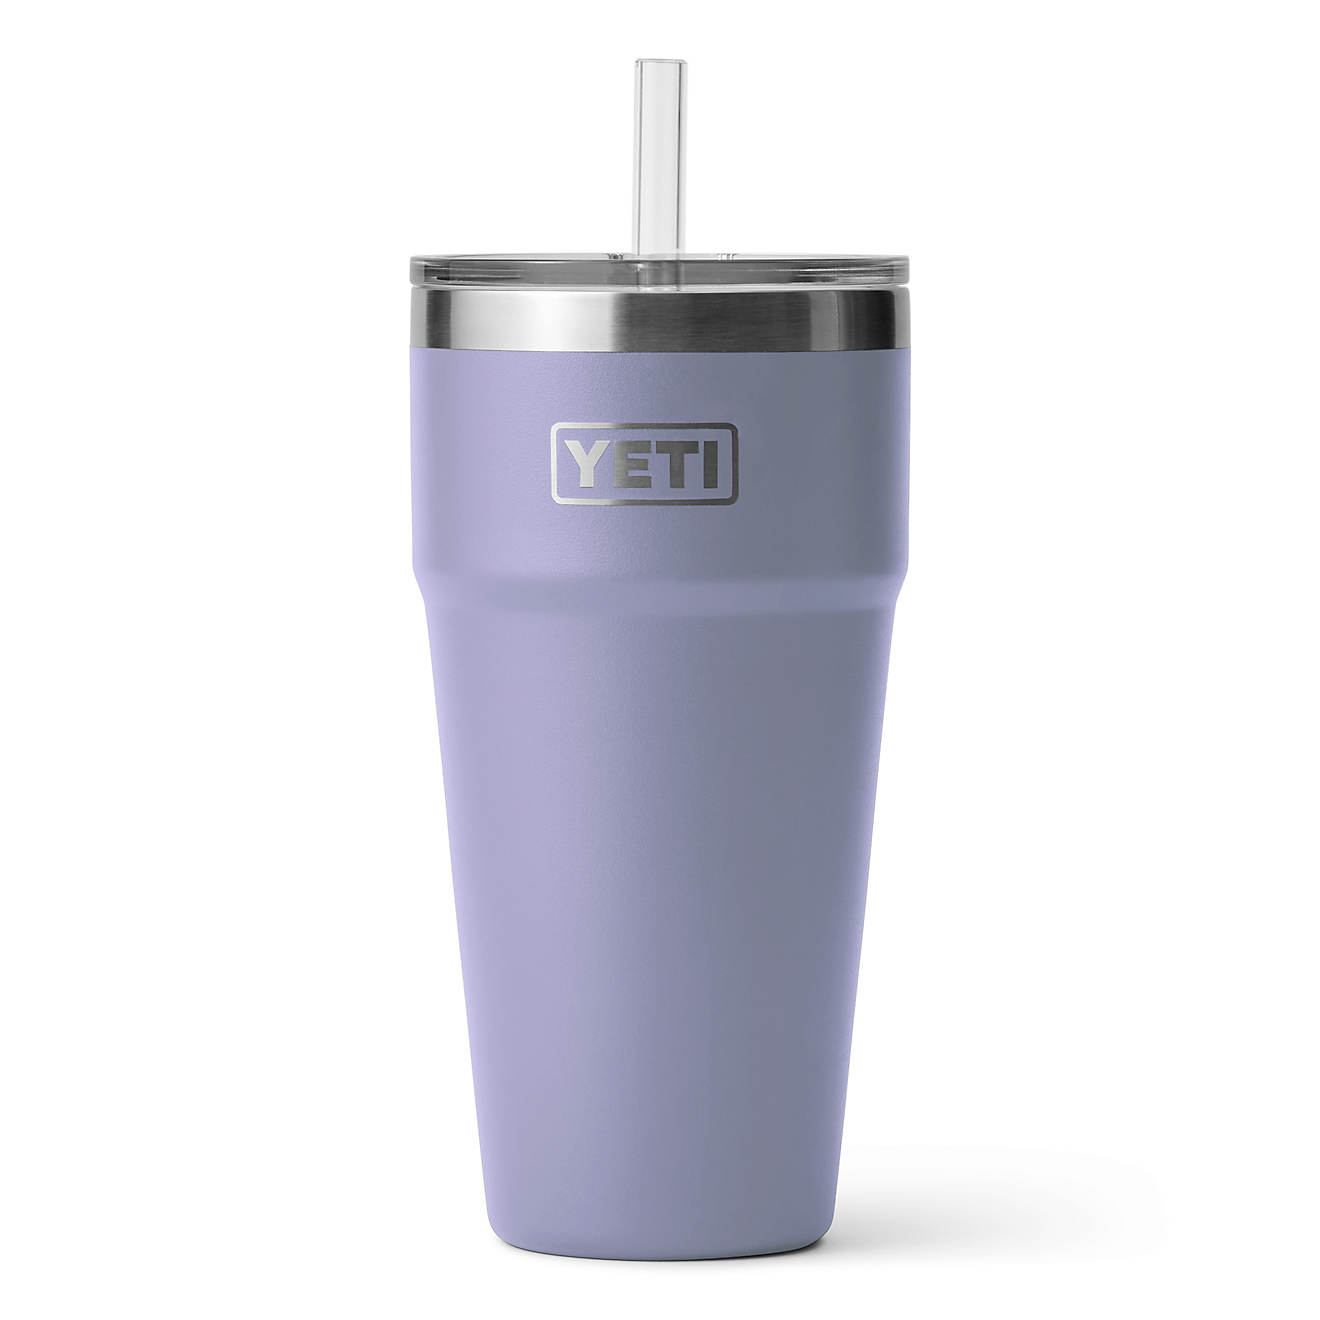 https://academy.scene7.com/is/image/academy//drinkware/yeti-rambler-26-oz-stackable-cup-with-straw-lid-21071501743-purple/cb9b5add3709494b8be58d8061284df9?$pdp-gallery-ng$